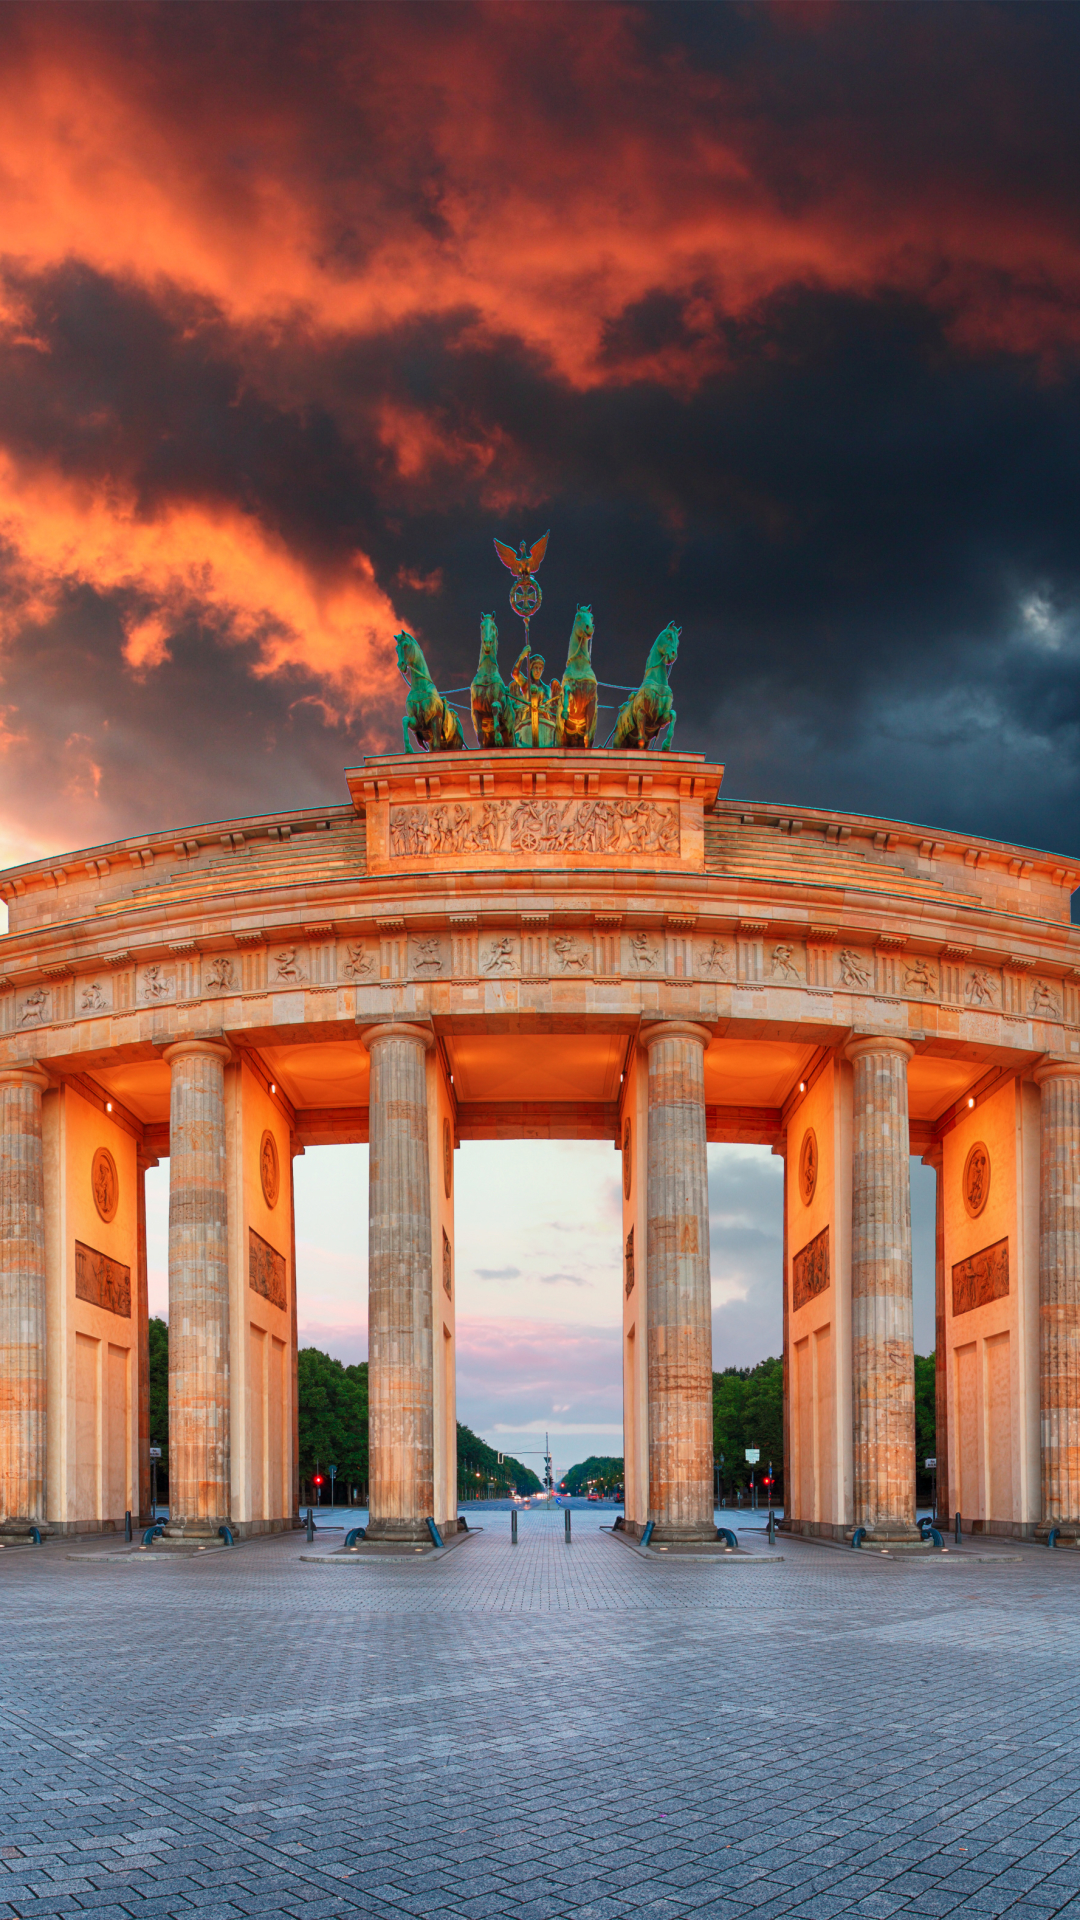 berlin, germany, brandenburg gate, man made, statue, monument, place, cloud, monuments QHD